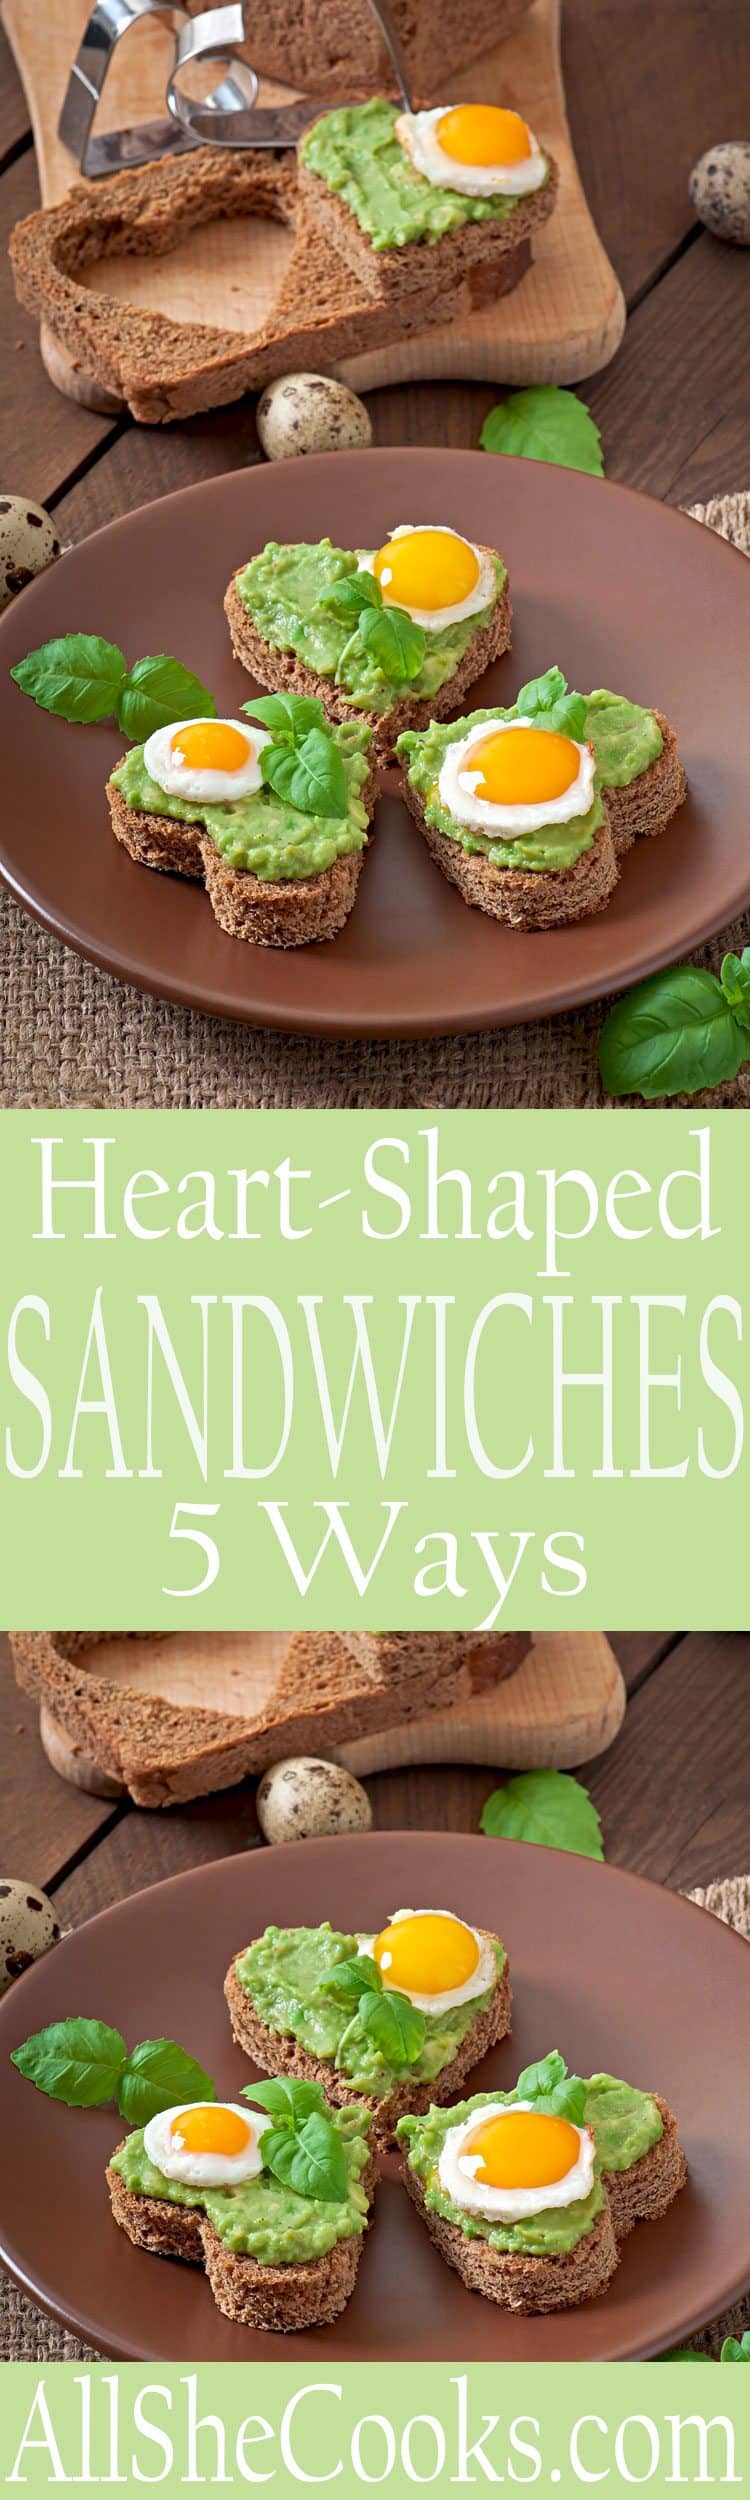 Enjoy Valentine's Day every day with these five heart shaped sandwiches that you can make for your sweetie all year long. Show someone you care.